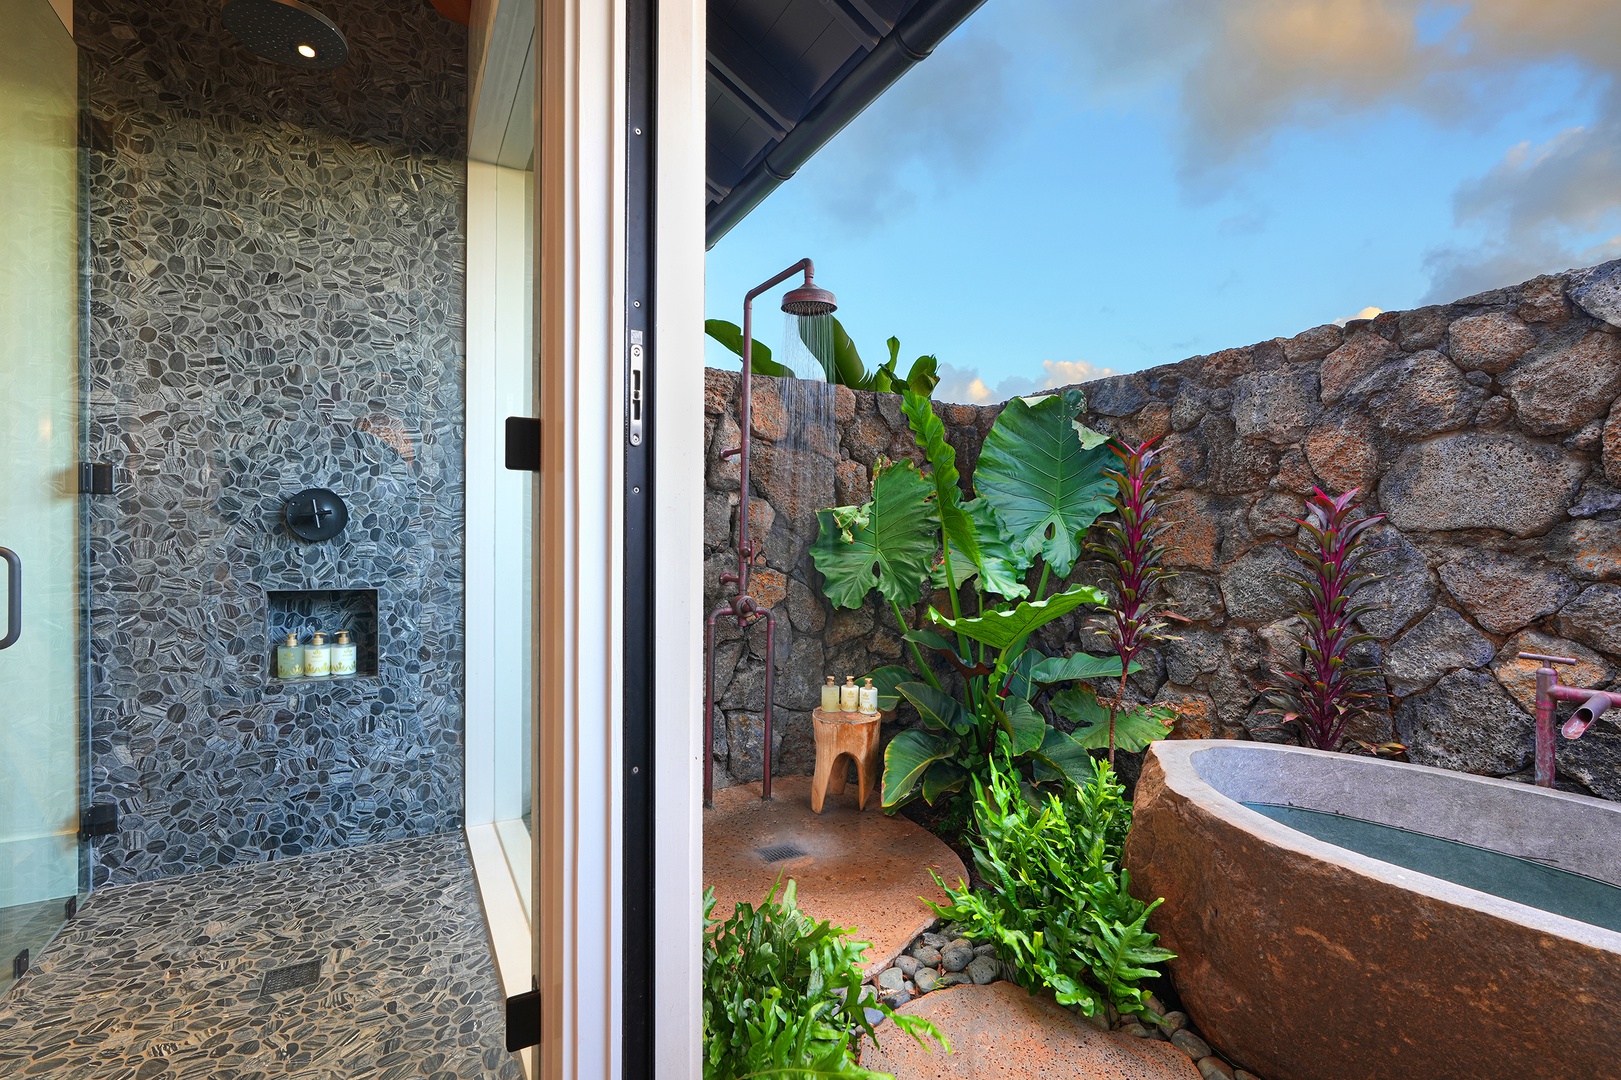 Koloa Vacation Rentals, Hale Pakika at Kukui'ula - Experience spa-like luxury with the outdoor soaking tub and shower for a tranquil and relaxing afternoon..